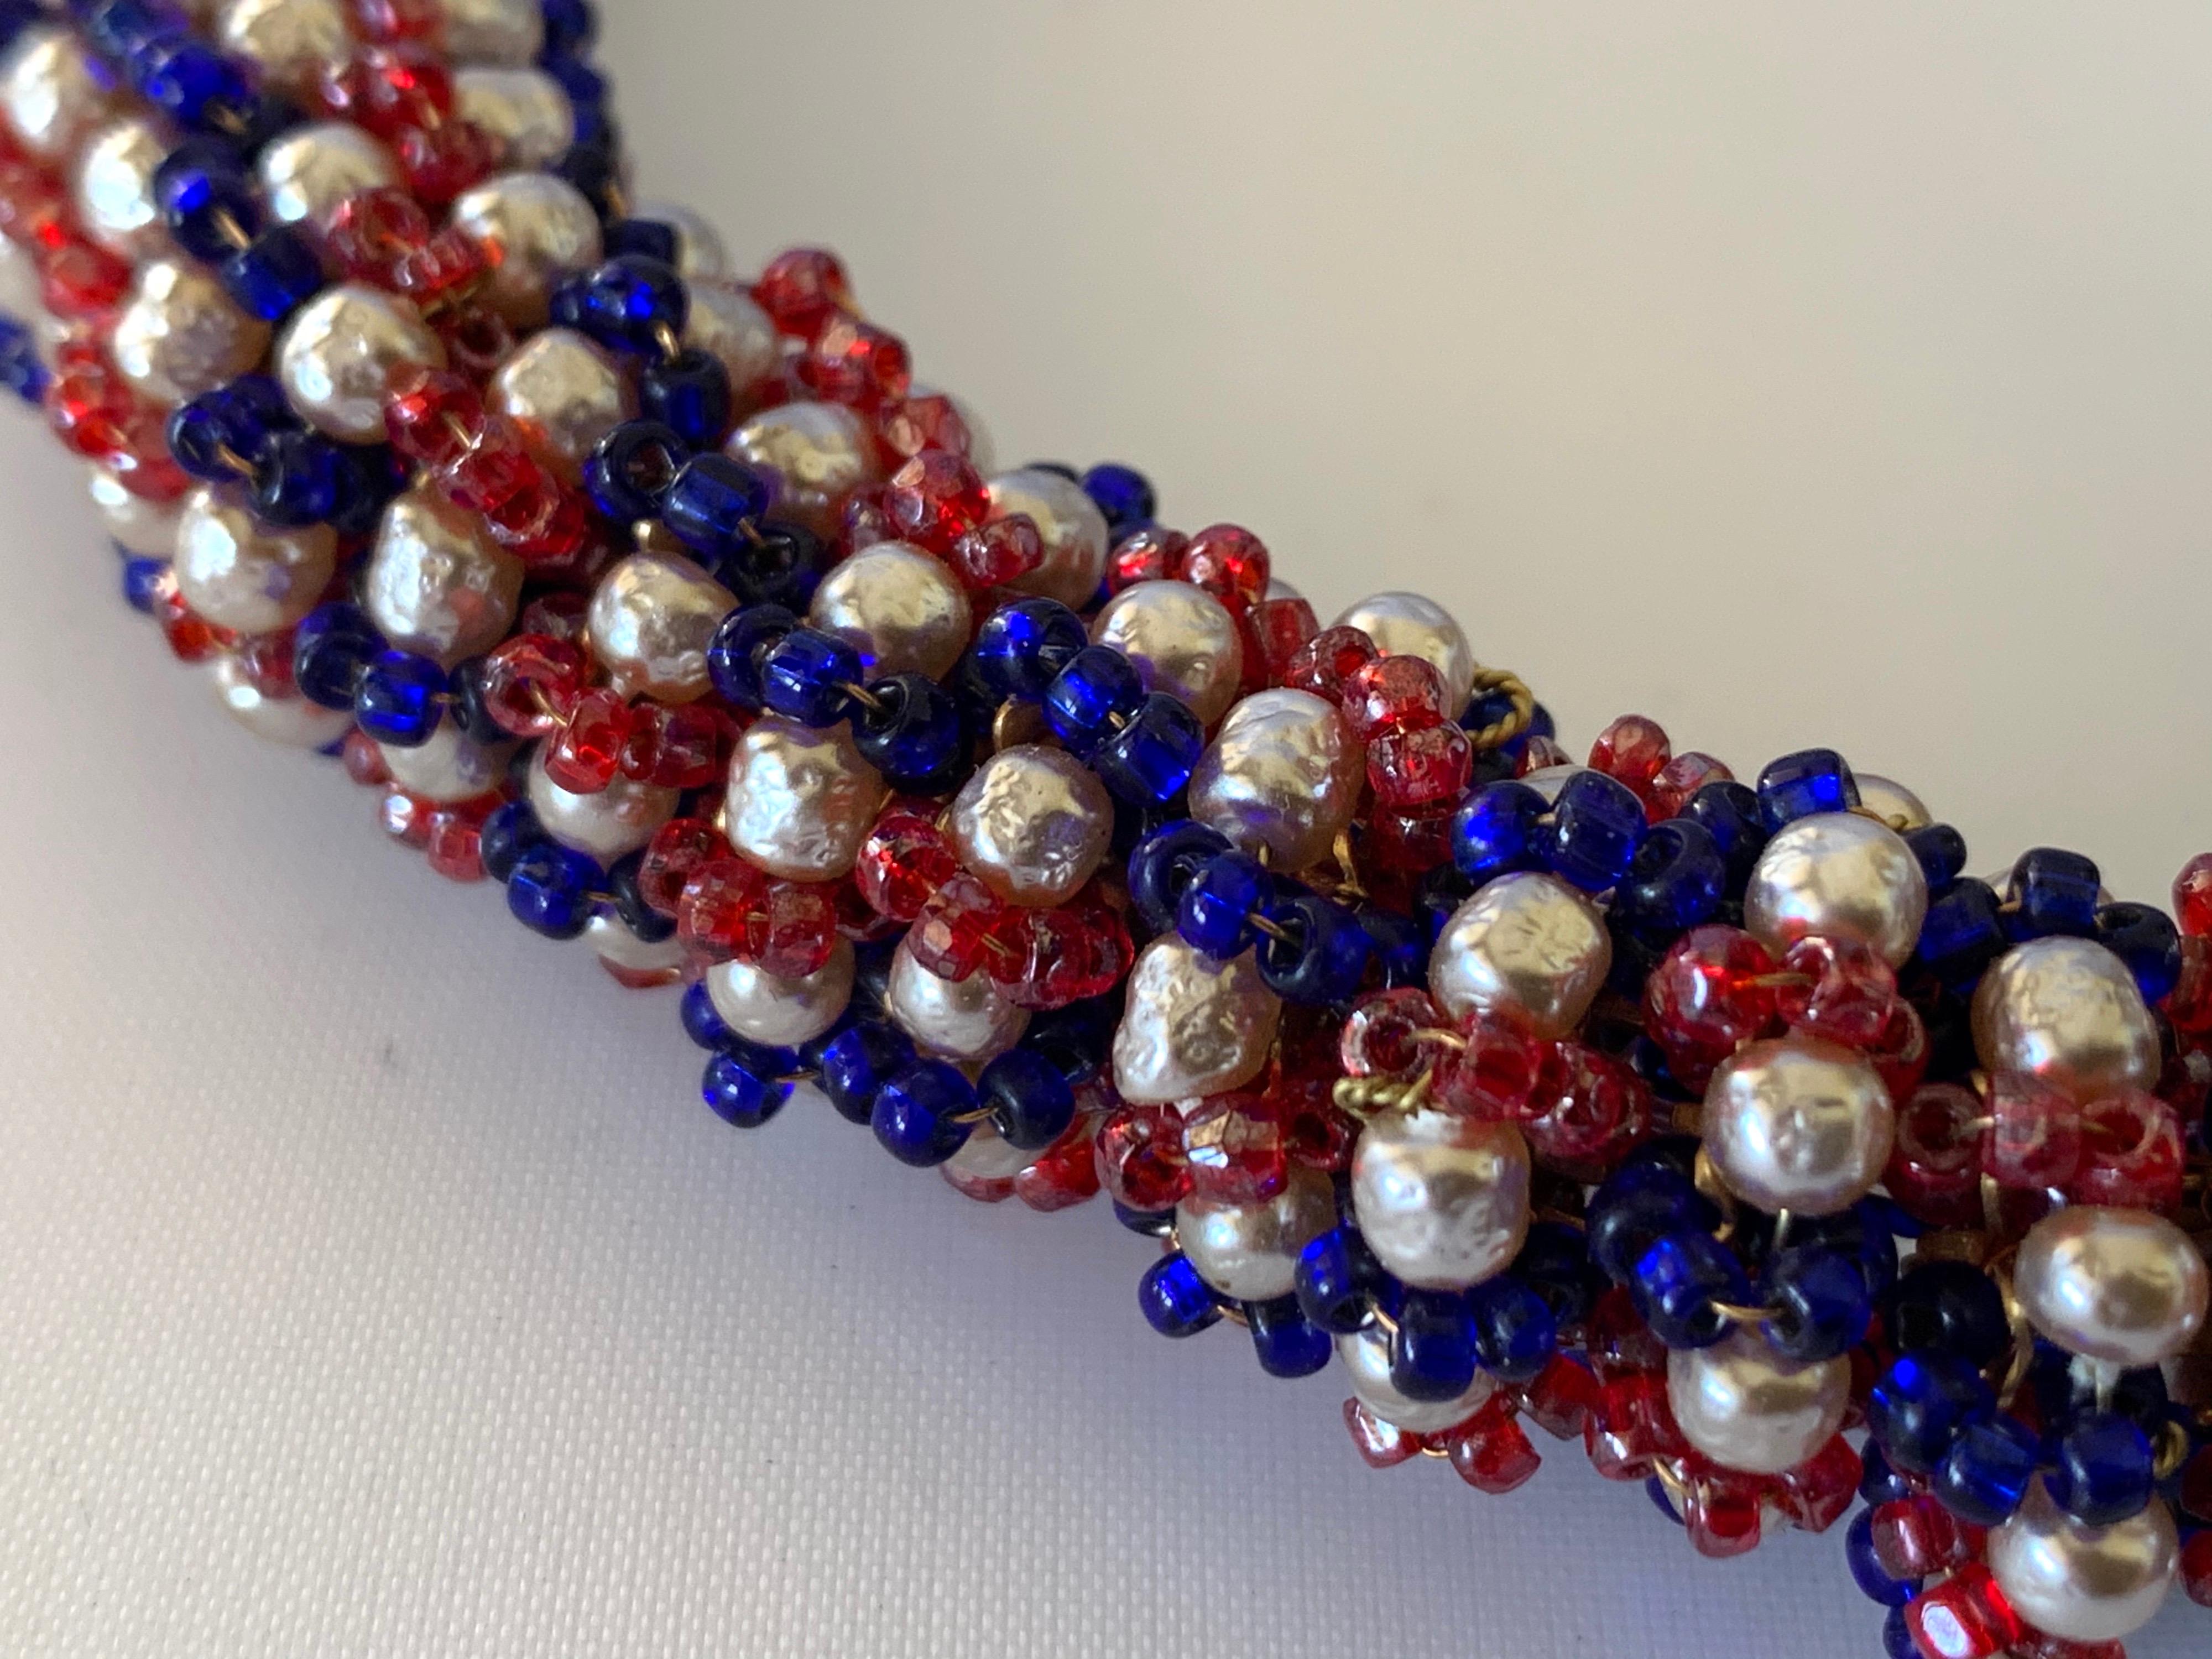 Artisan Coco Chanel Red, White and Blue Haute Couture Star Statement Necklace